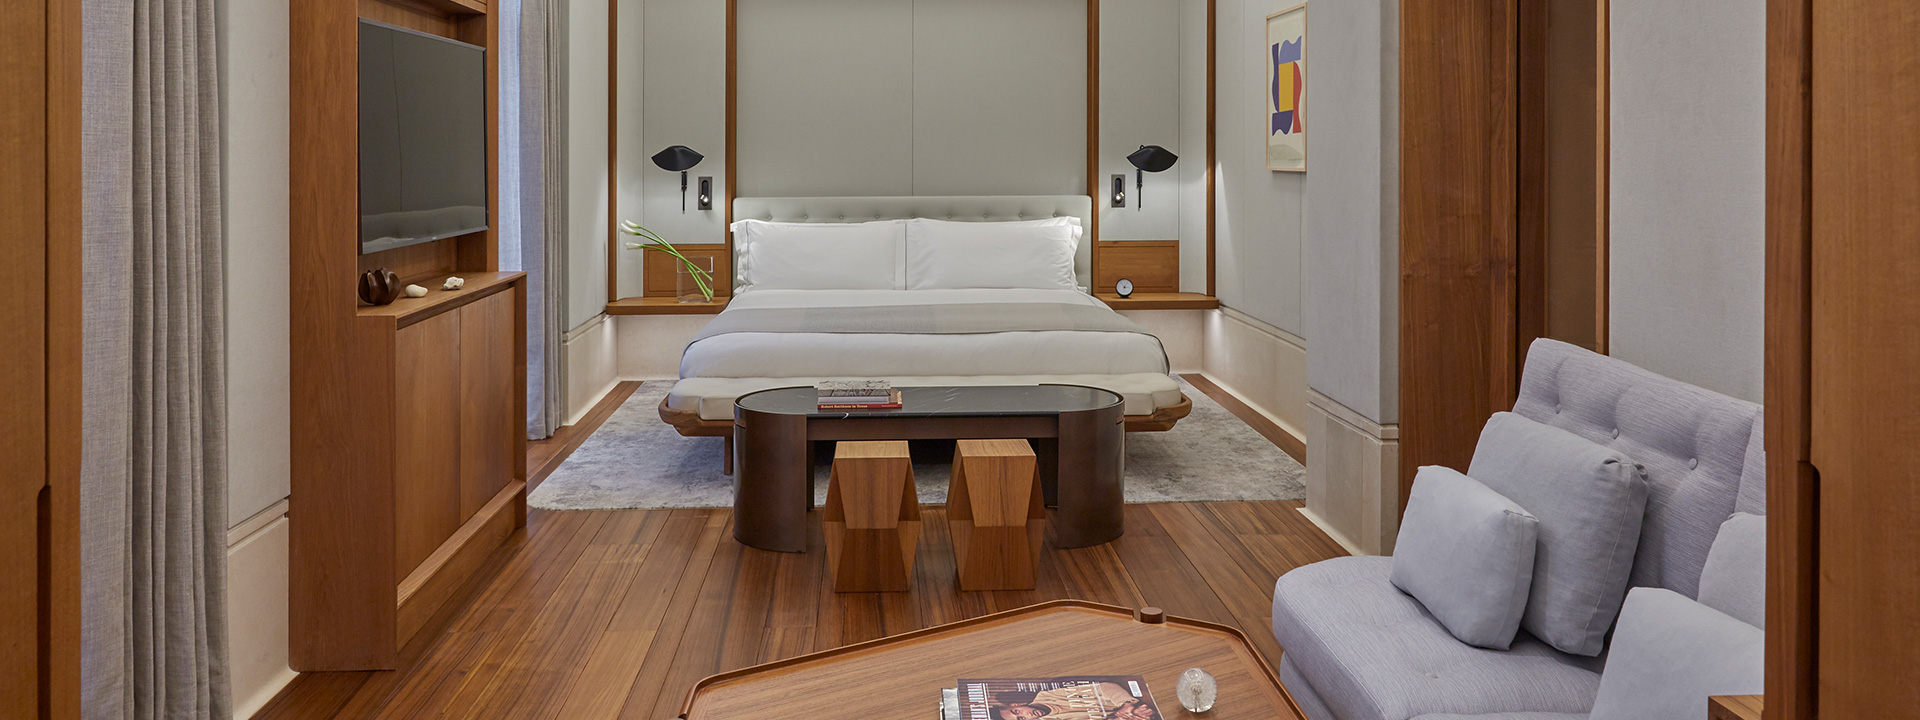 A comfortable King Bed in the bedroom of the Knightsbridge Suite, in an interior with wooden and natural design tones.